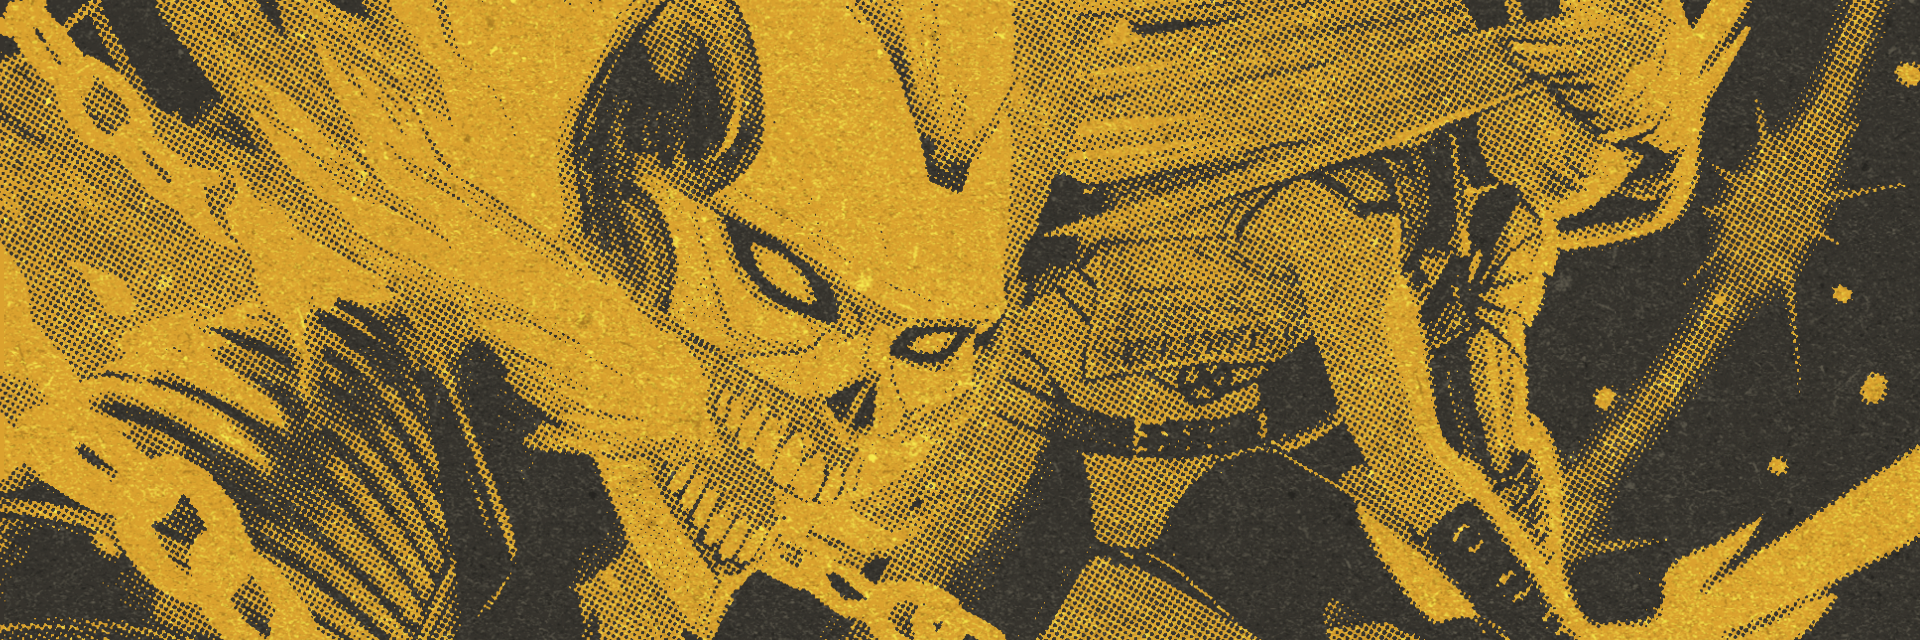 Mondo opens preorders for Marvel's Midnight Suns vinyl - The Ongaku